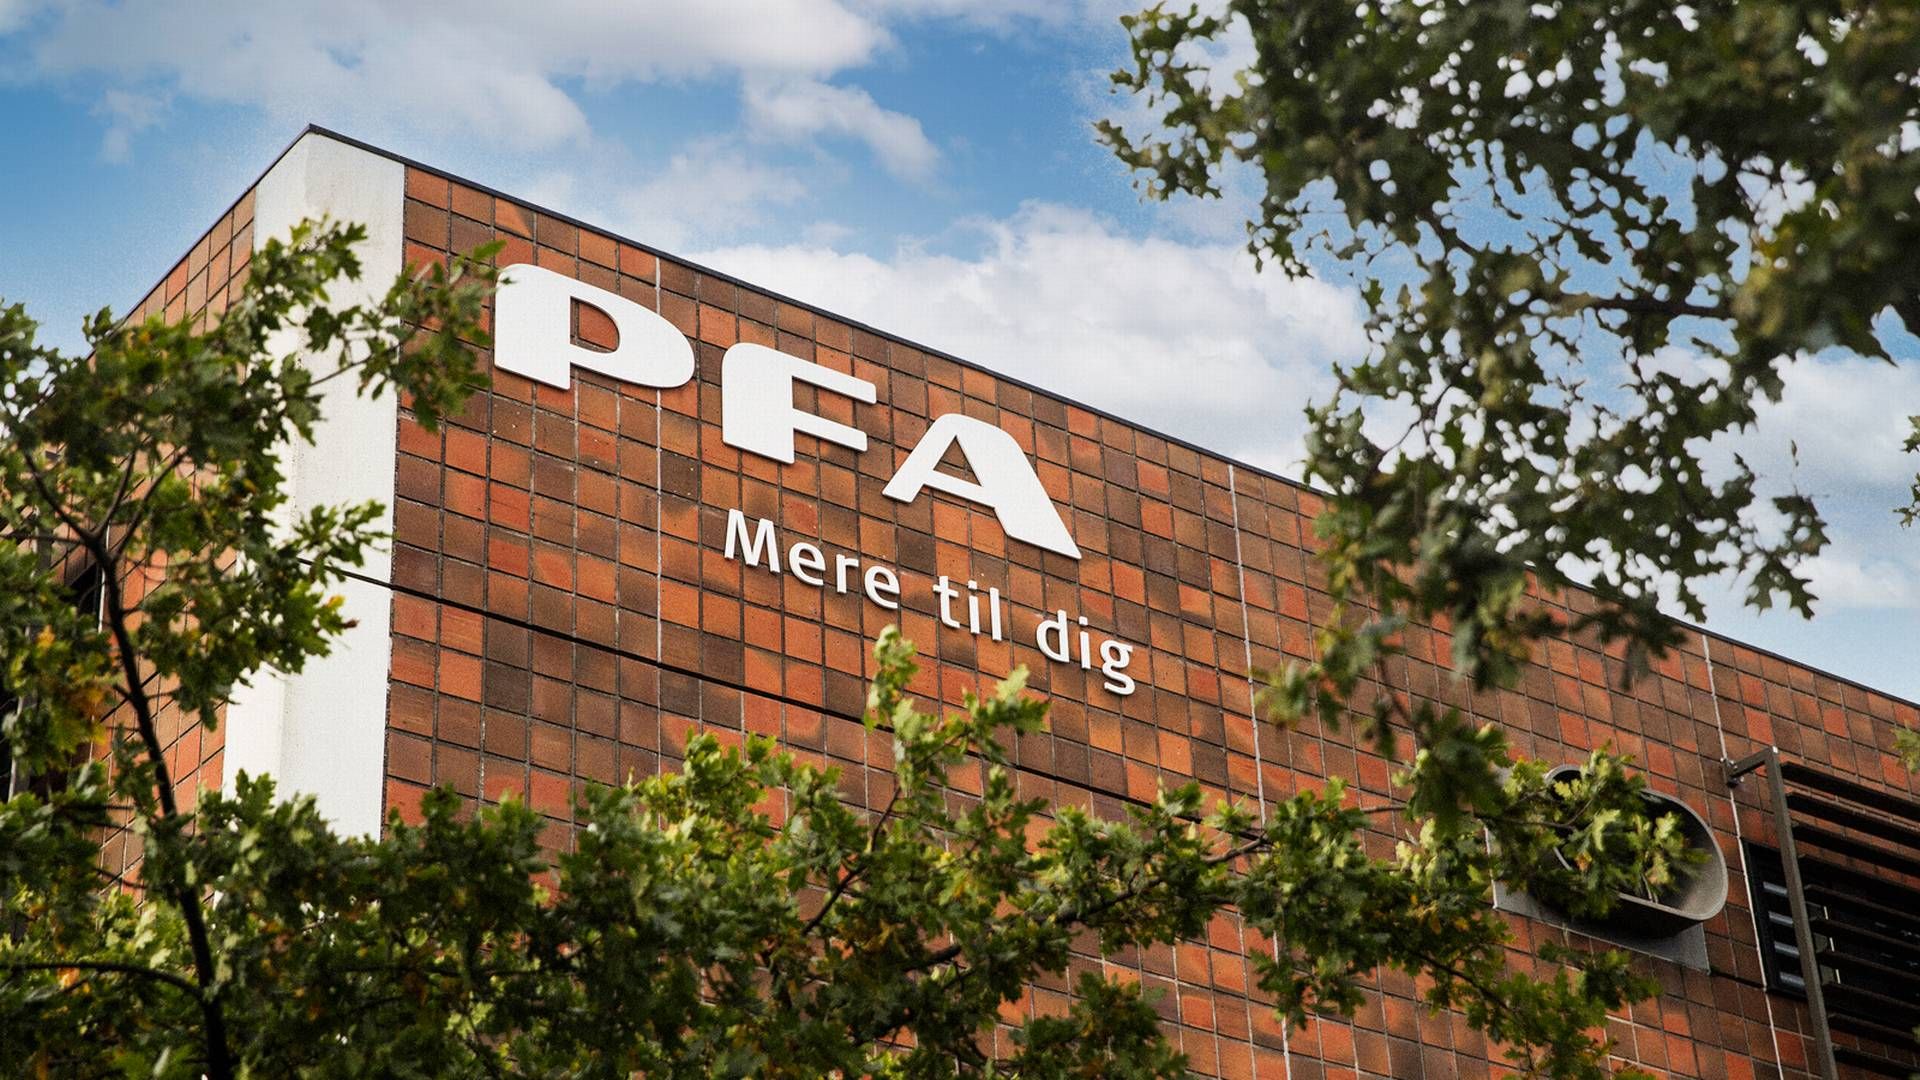 Head of Media Relations at PFA tells Danish business media Børsen that the fund has complete faith in TDC's strategy and expects the investment to yield a stable, long-term return. | Photo: Pr / Pfa